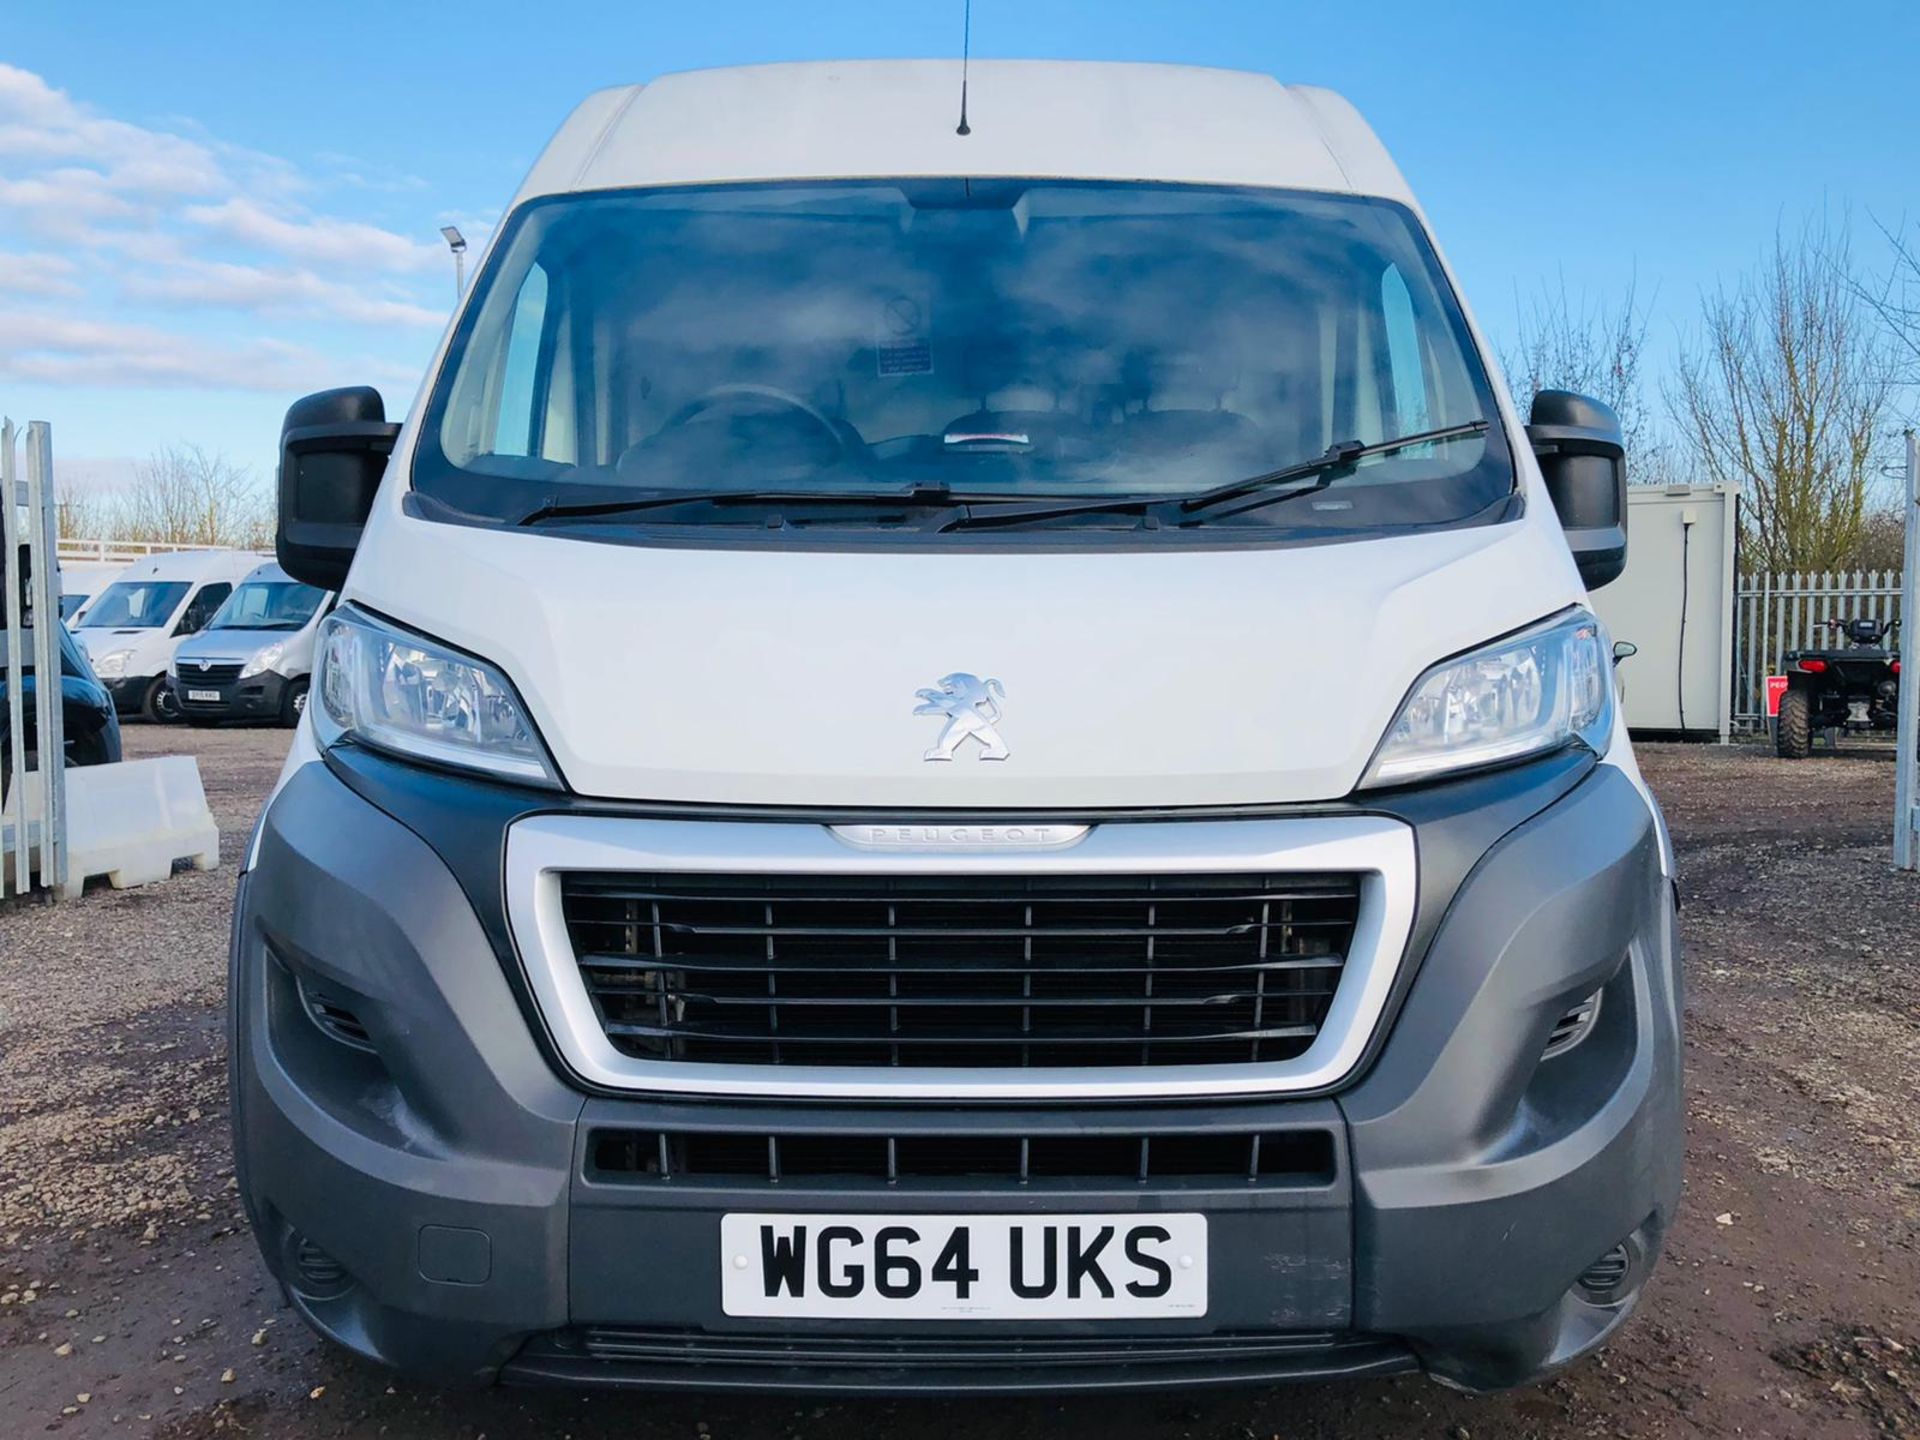 Peugeot Boxer 2.2 HDI 435 Professional L4 H2 2014 '64 Reg' Sat Nav - Air Con - Only Done 76K - Image 4 of 24